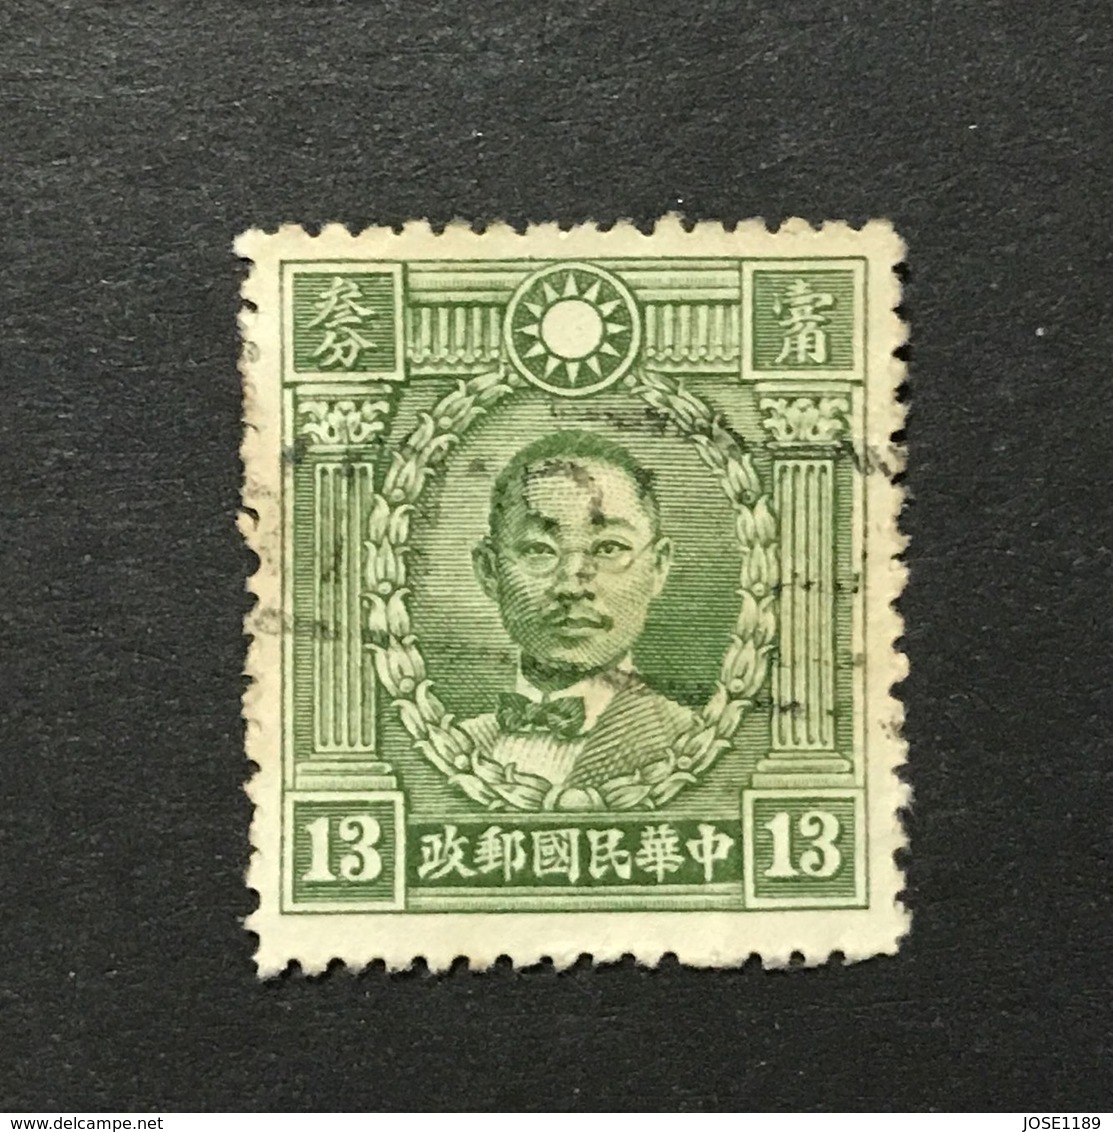 ◆◆◆CHINA 1932  The Martyrs Issue, Peking Print     13C  USED  AA3999 - 1912-1949 República